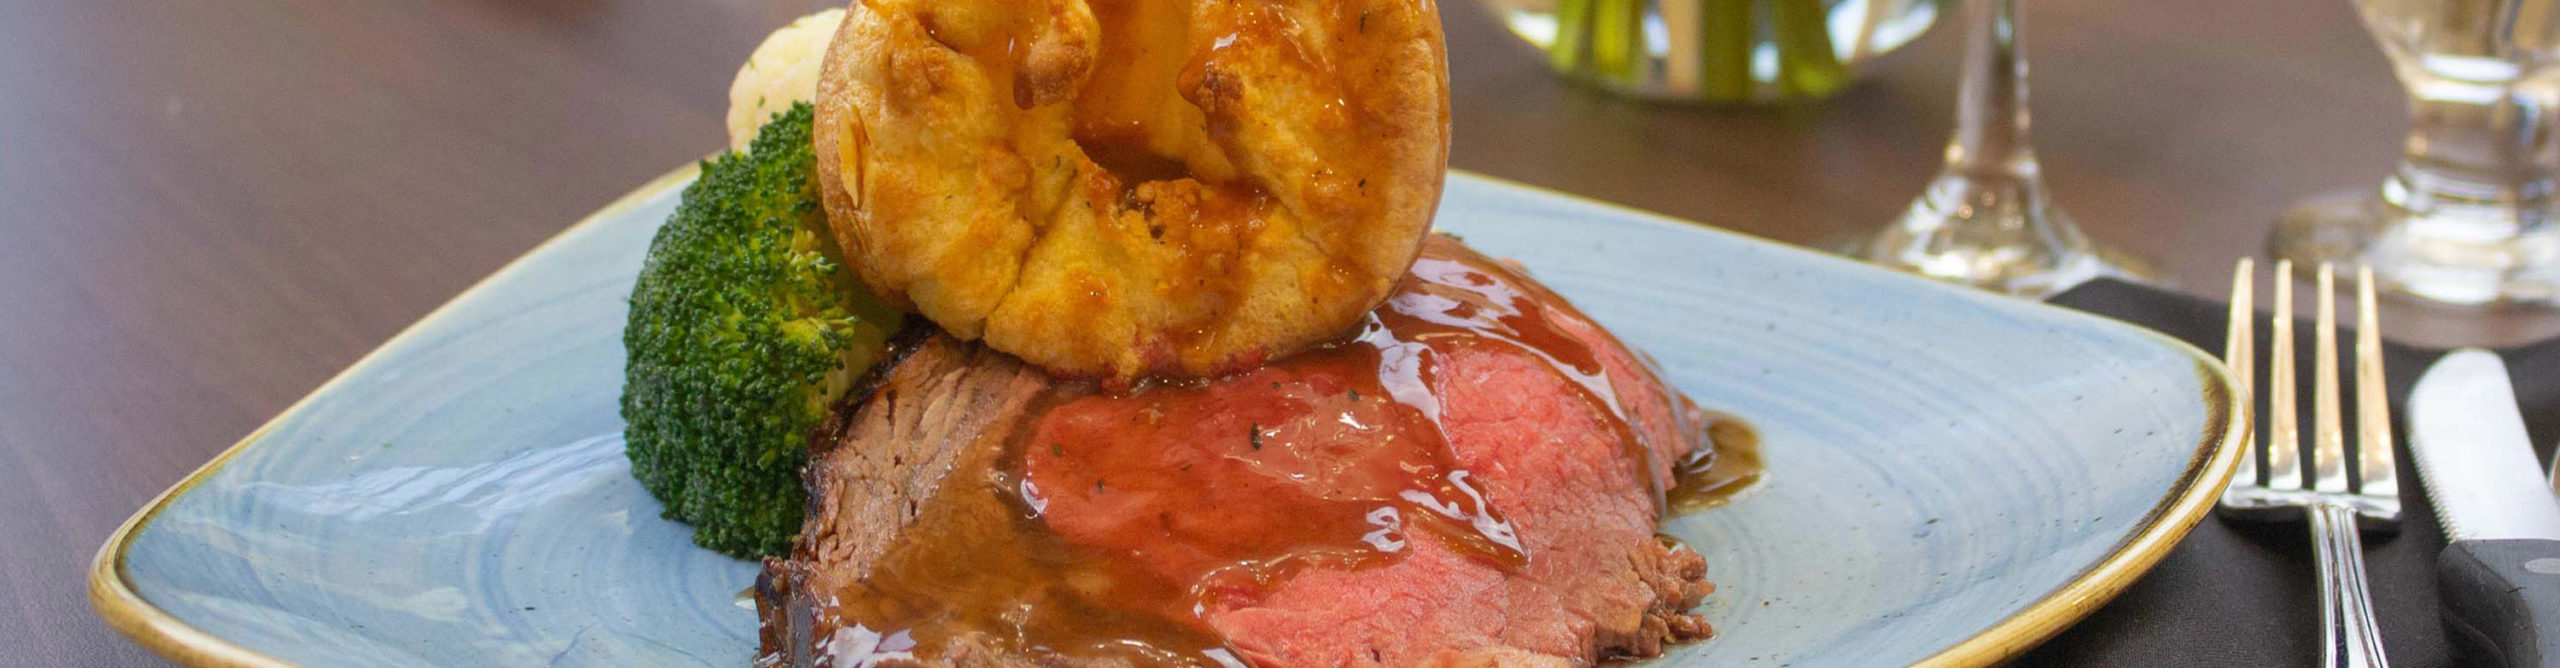 Wexford Roast Beef and Yorkshire